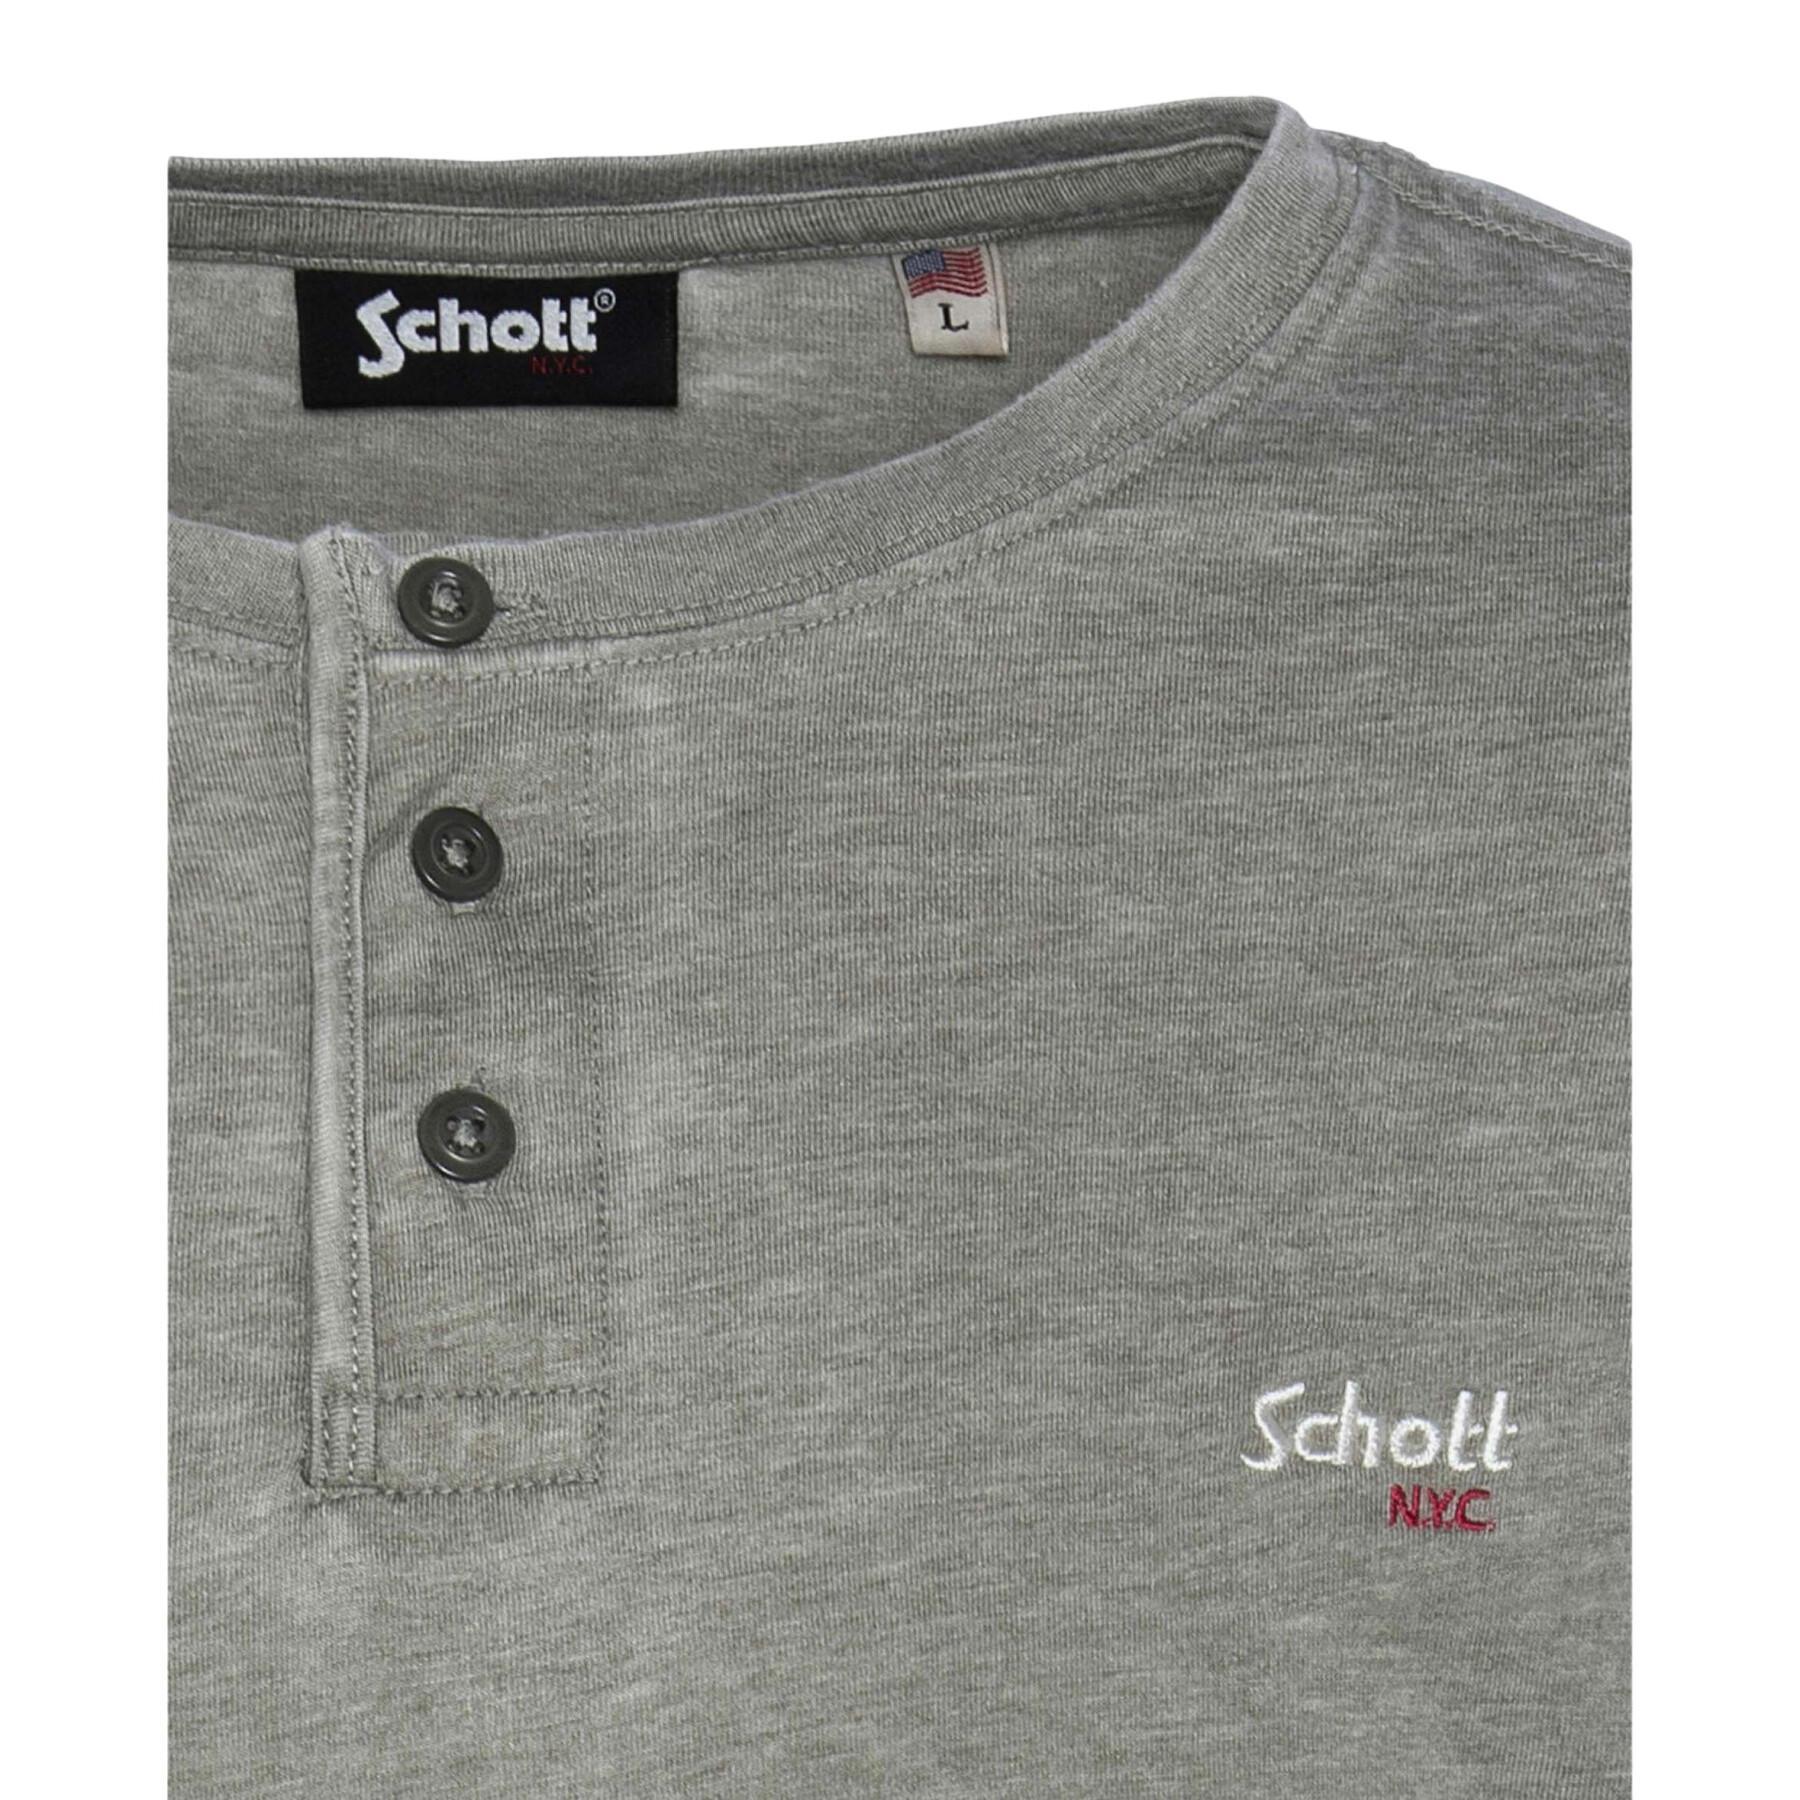 Long sleeve t-shirt with tunisian collar and embroidery on chest Schott